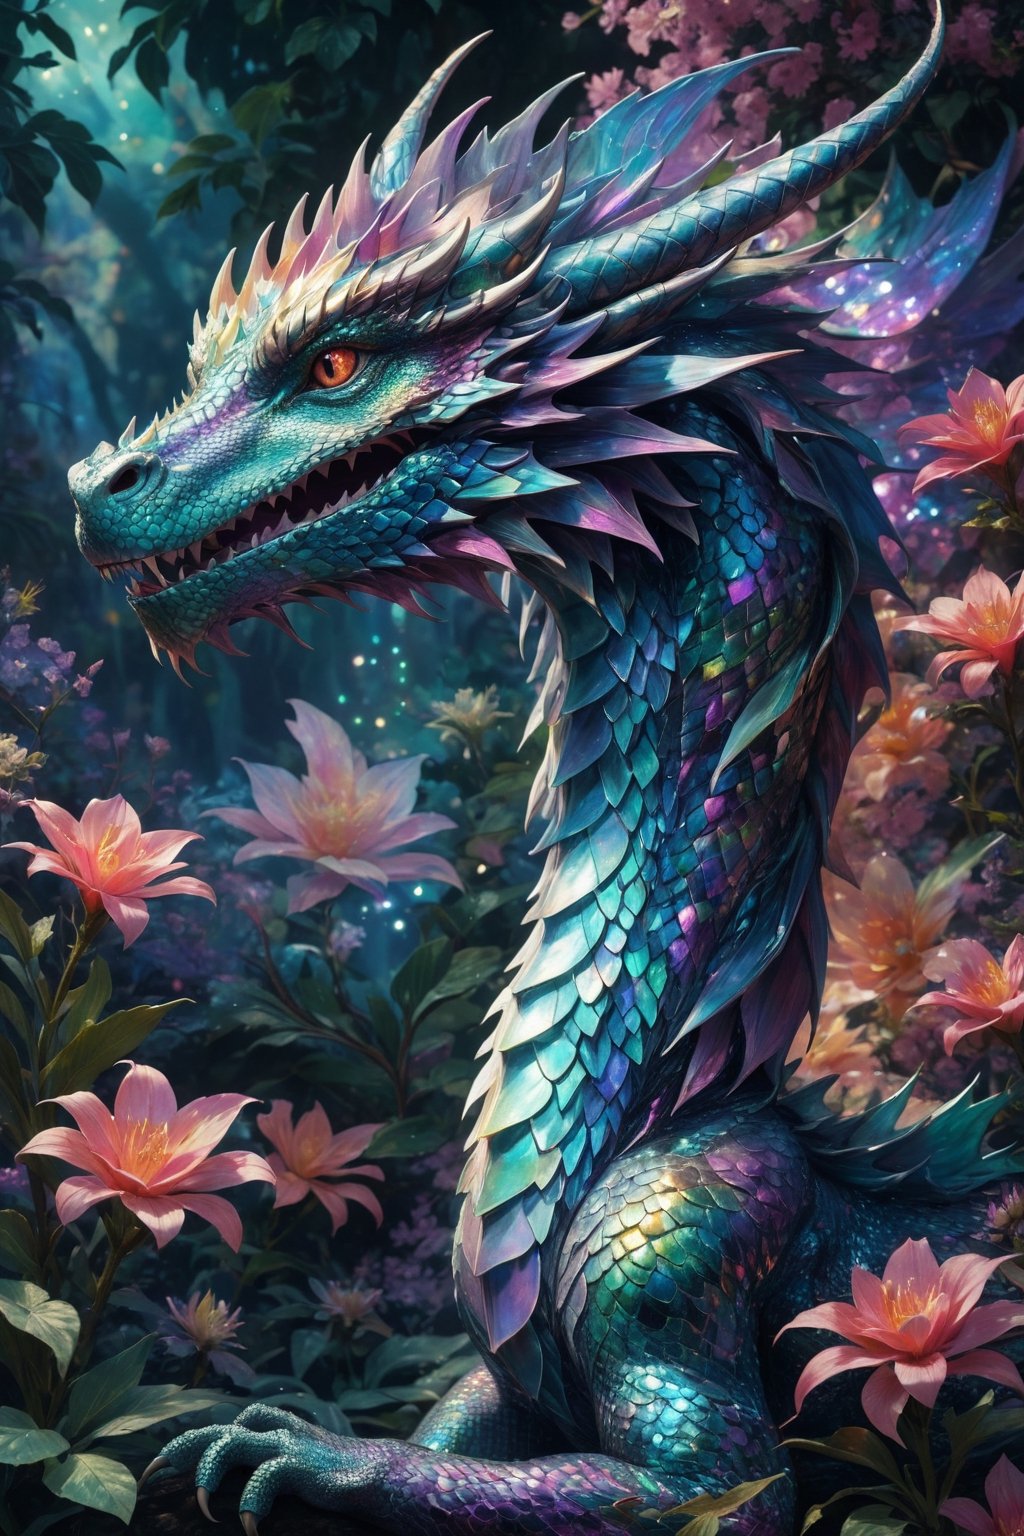 Generate hyper realistic image of a dragon with iridescent, shimmering skin that reflects light in mesmerizing patterns, giving them an ethereal and otherworldly appearance, floral landscape,